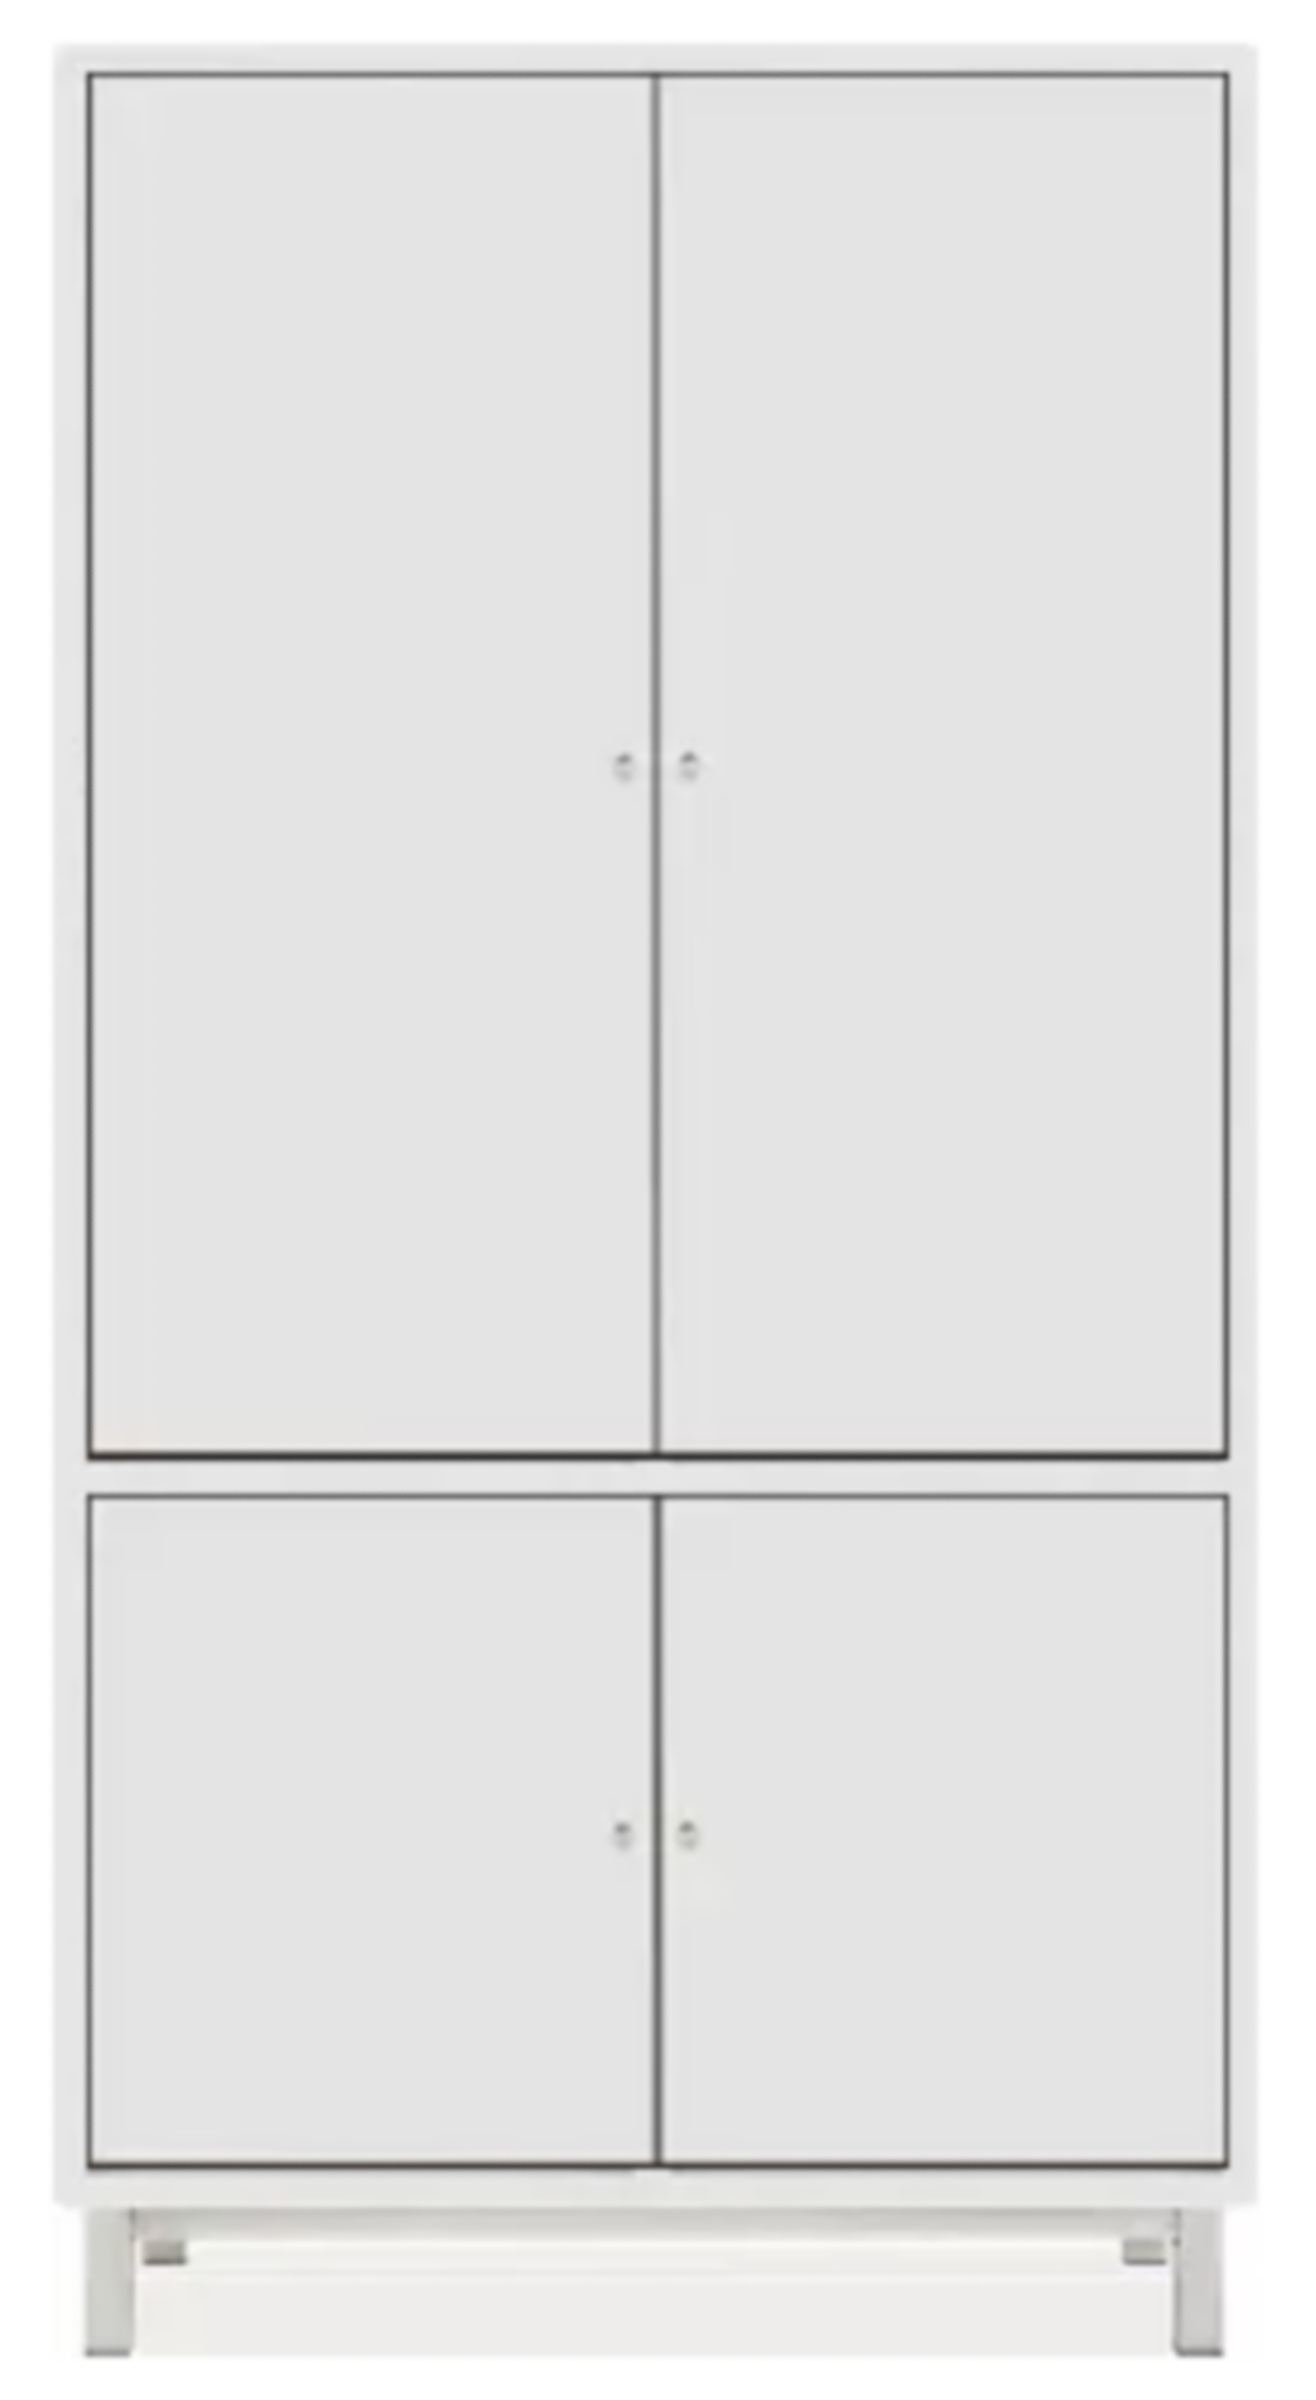 Copenhagen 39w 20d 75h Cabinet in White with Stainless Steel